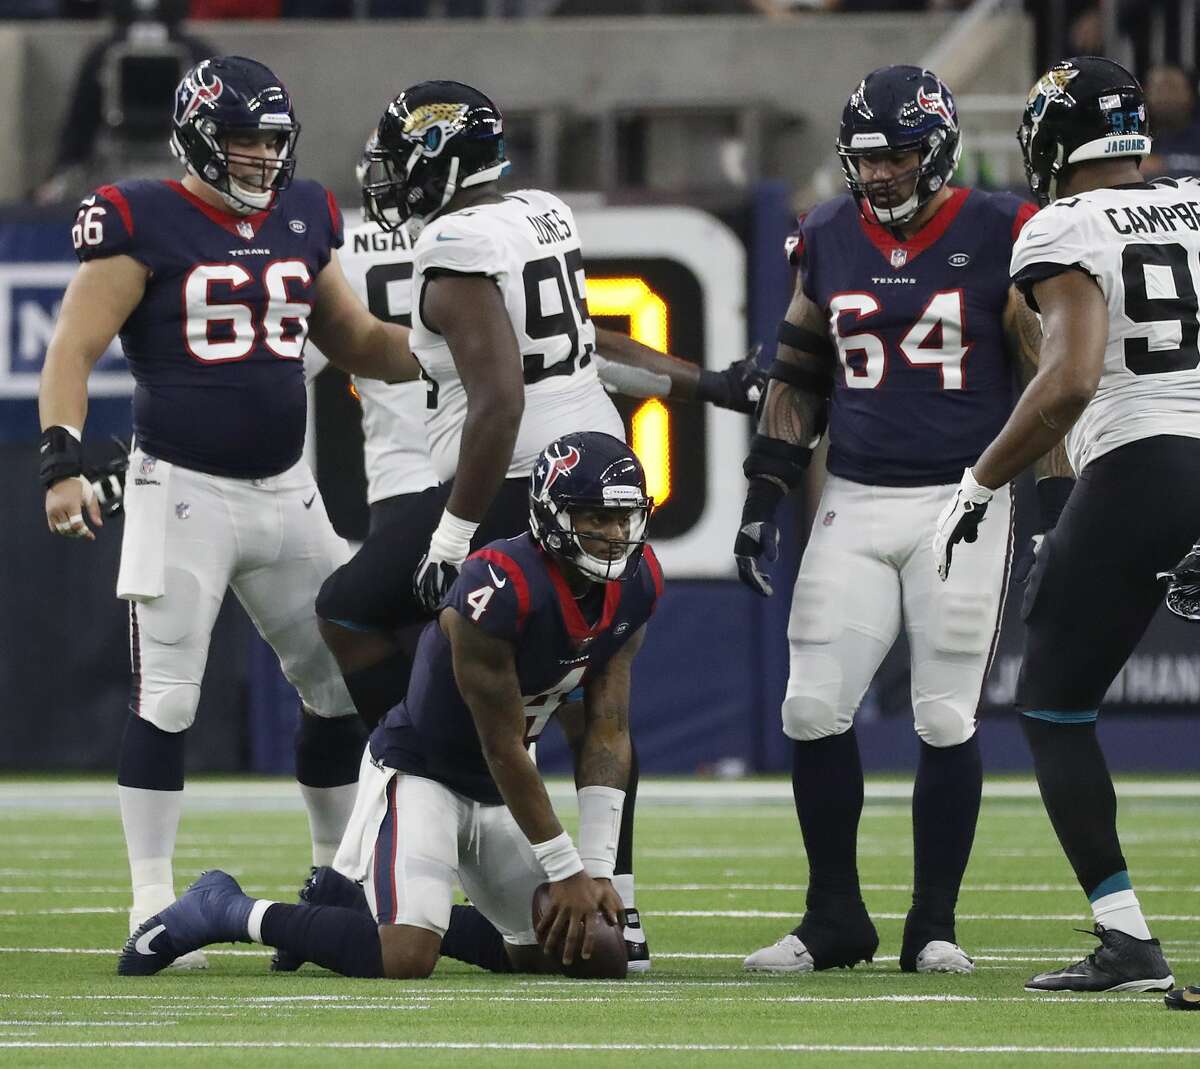 Keeping Deshaun Watson upright arguably will be the Texans' top priority next season after he was sacked 62 times in 2018.